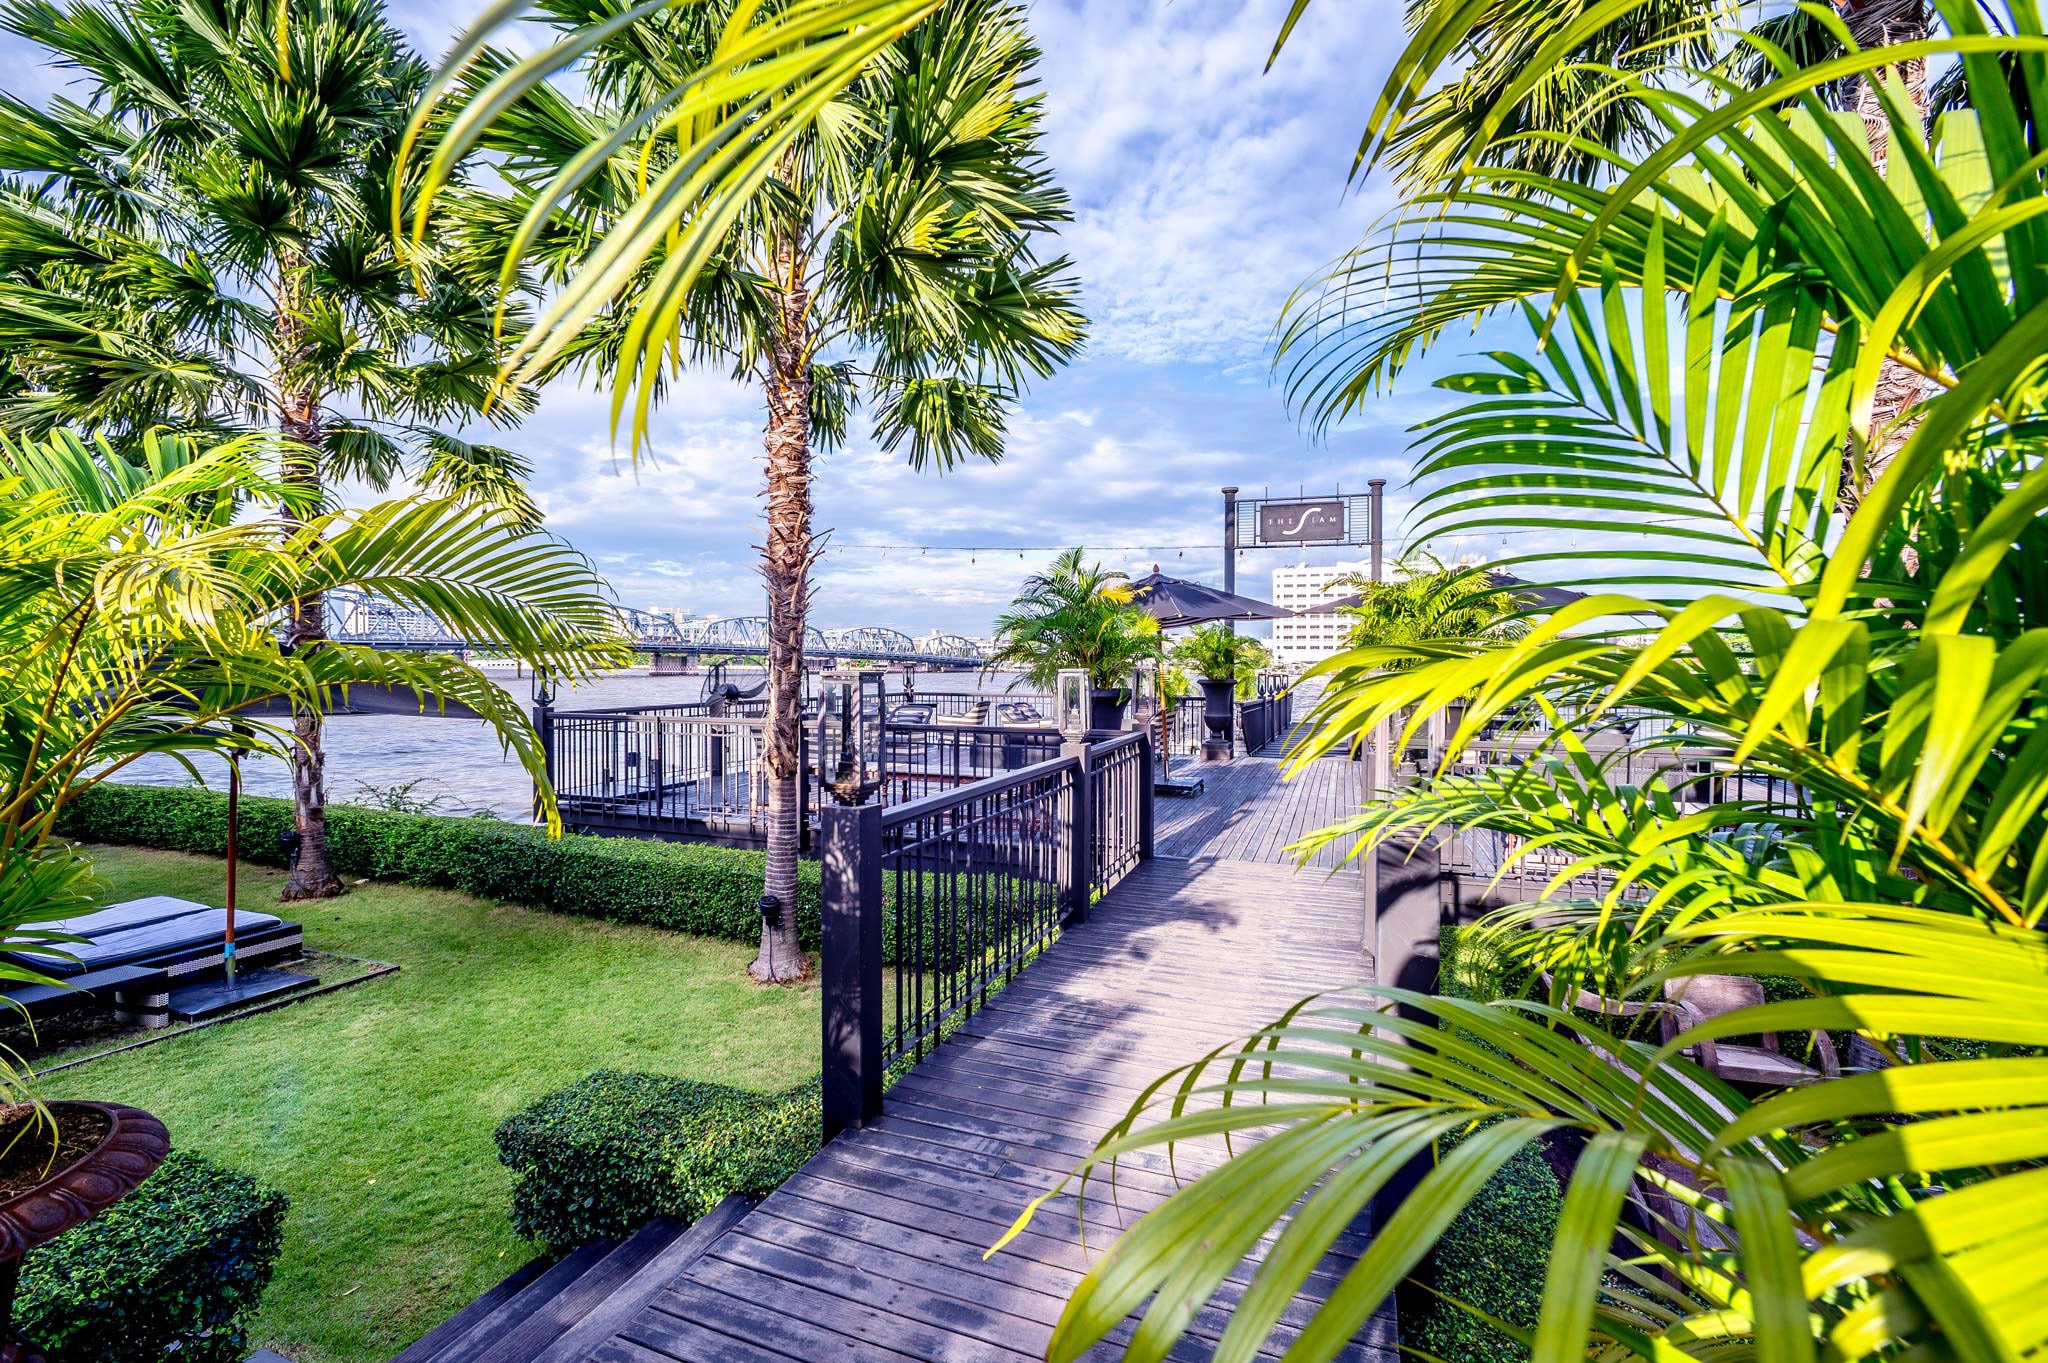 Exterior photograph of the jetty at The Siam, a luxurious hotel in Bangkok, Thailand, captured by Wright Content. The image showcases the elegant jetty surrounded by palm trees, overlooking the river with the iconic metal railing bridge in the background.